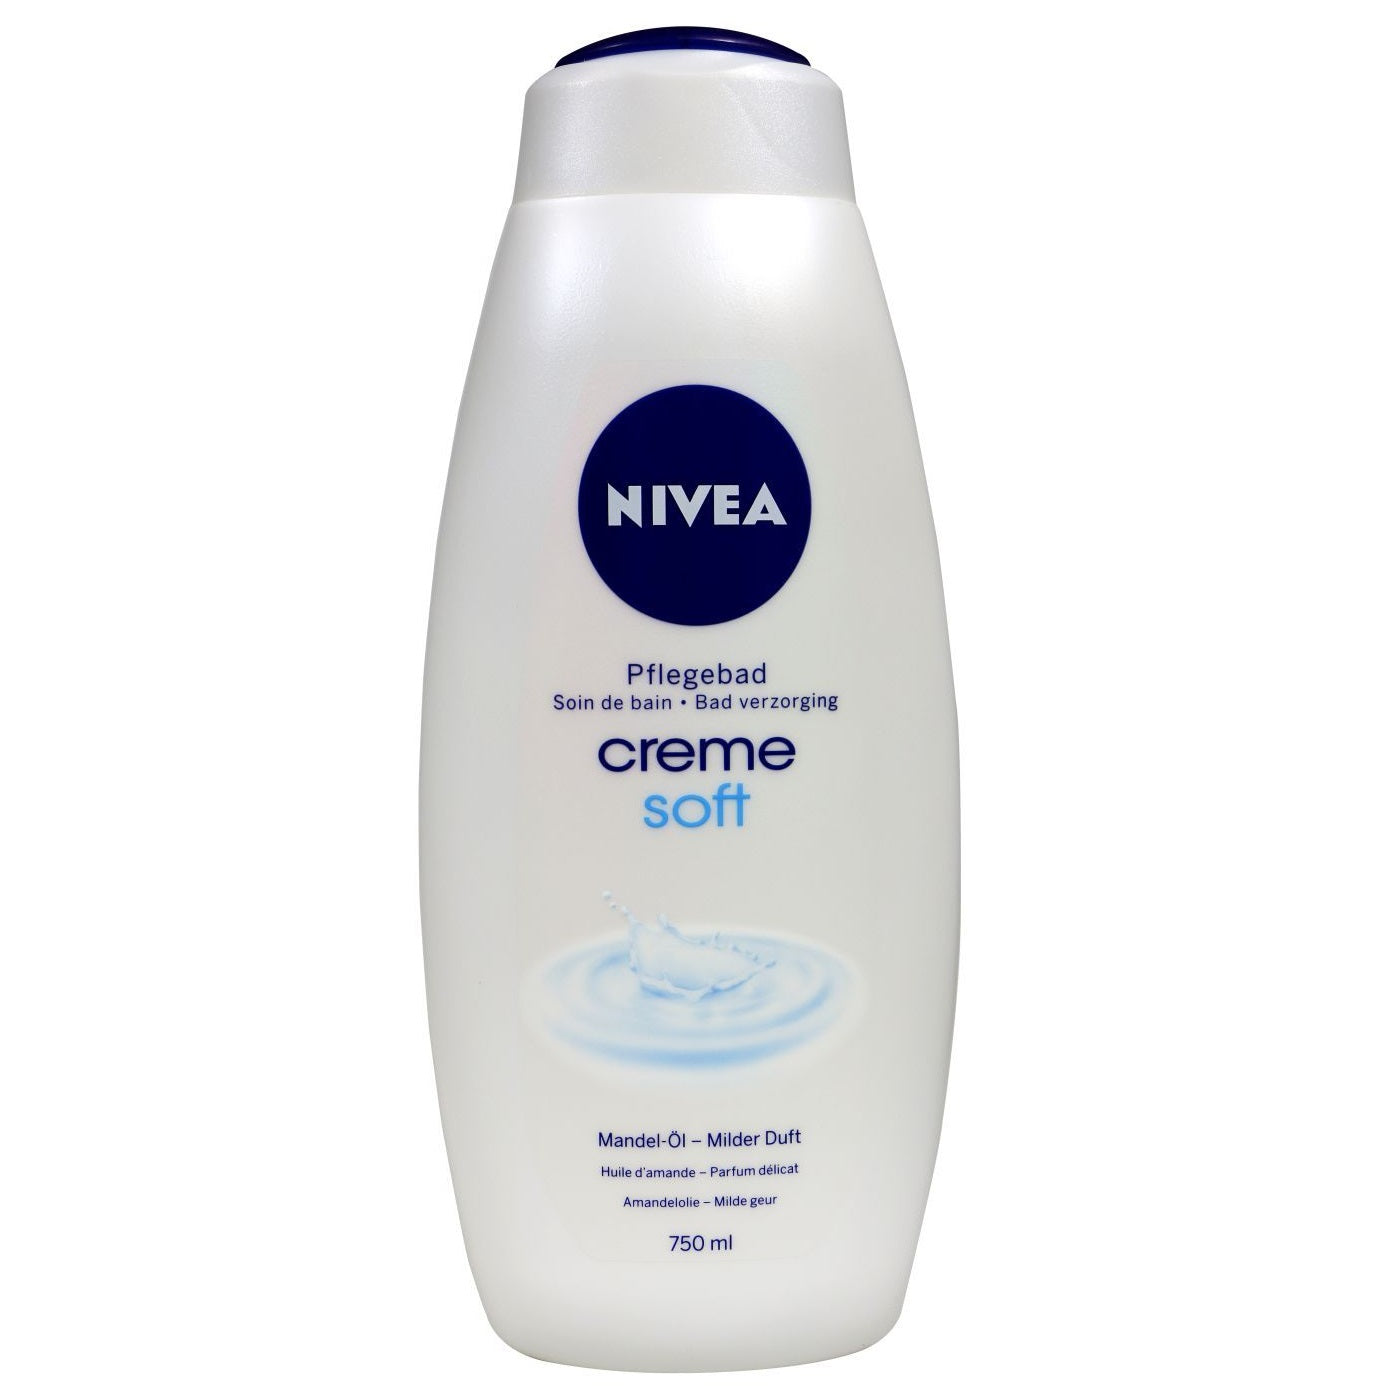 Nivea Cream Bath - Creme Soft - for women of all ages and all skin types - 750 ml (Pack of 2pc)